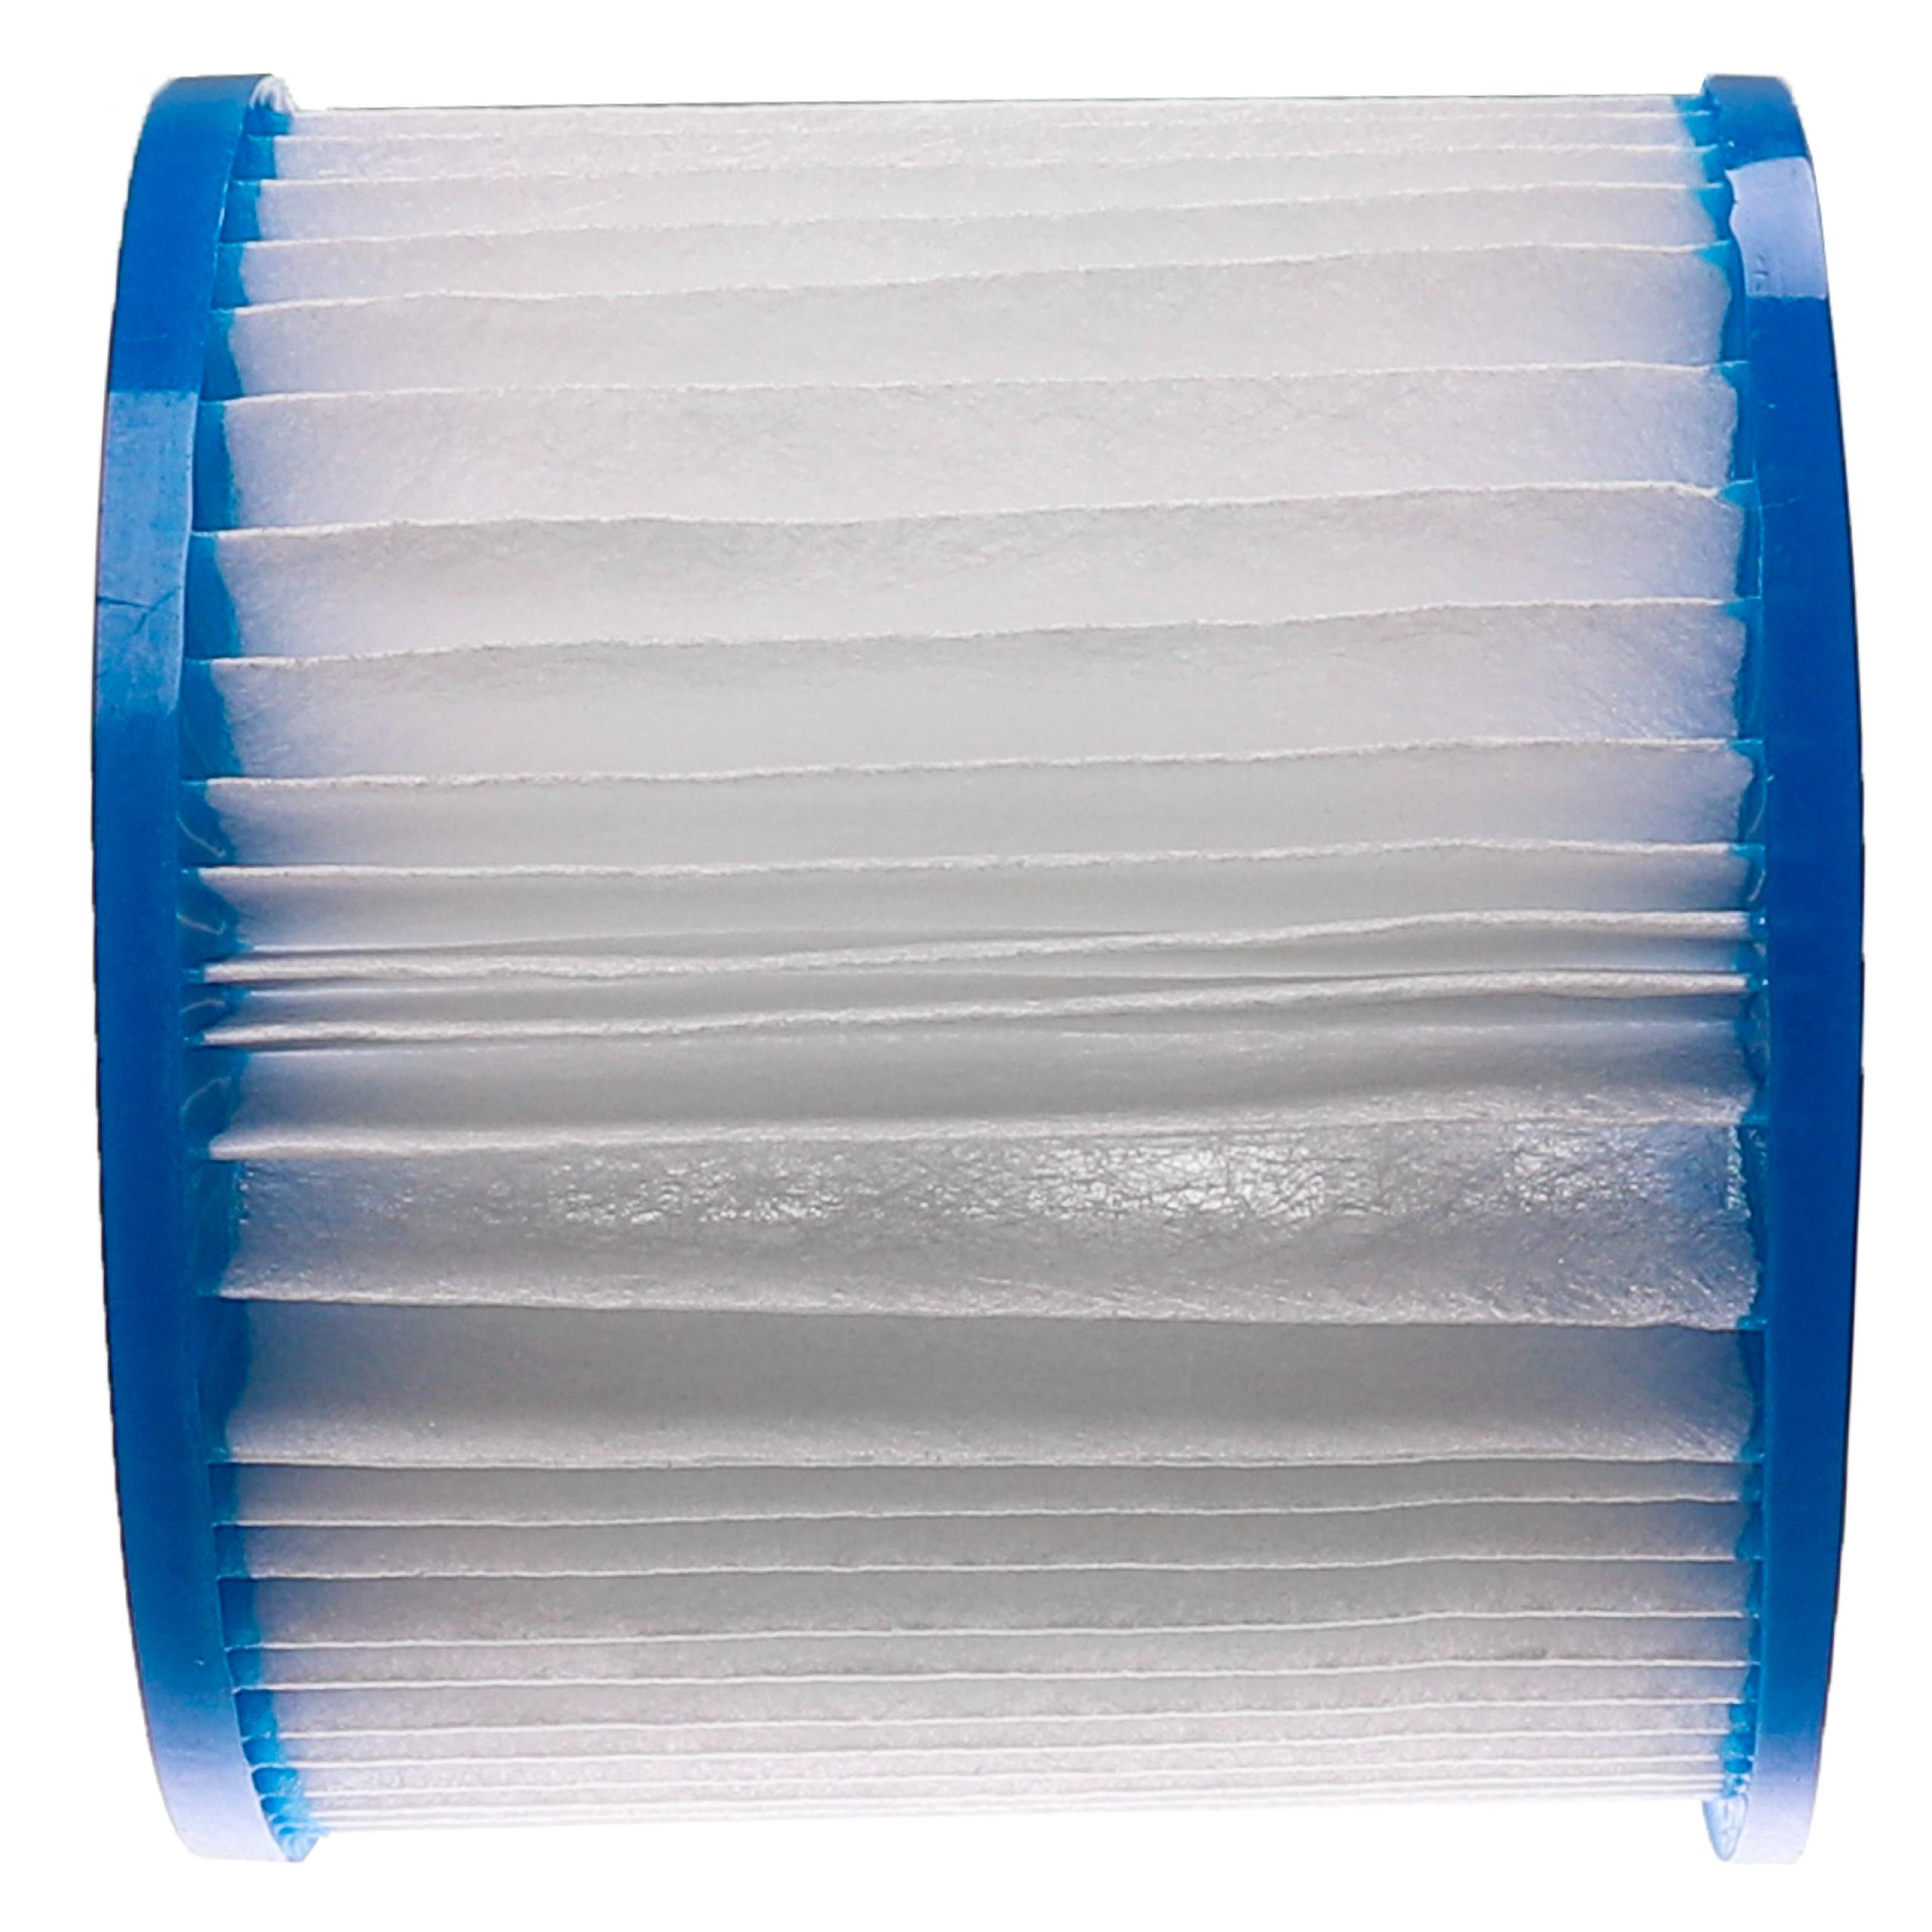 Pool Filter Type VII as Replacement for Bestway FD2136, Typ VII, Typ D - Filter Cartridge